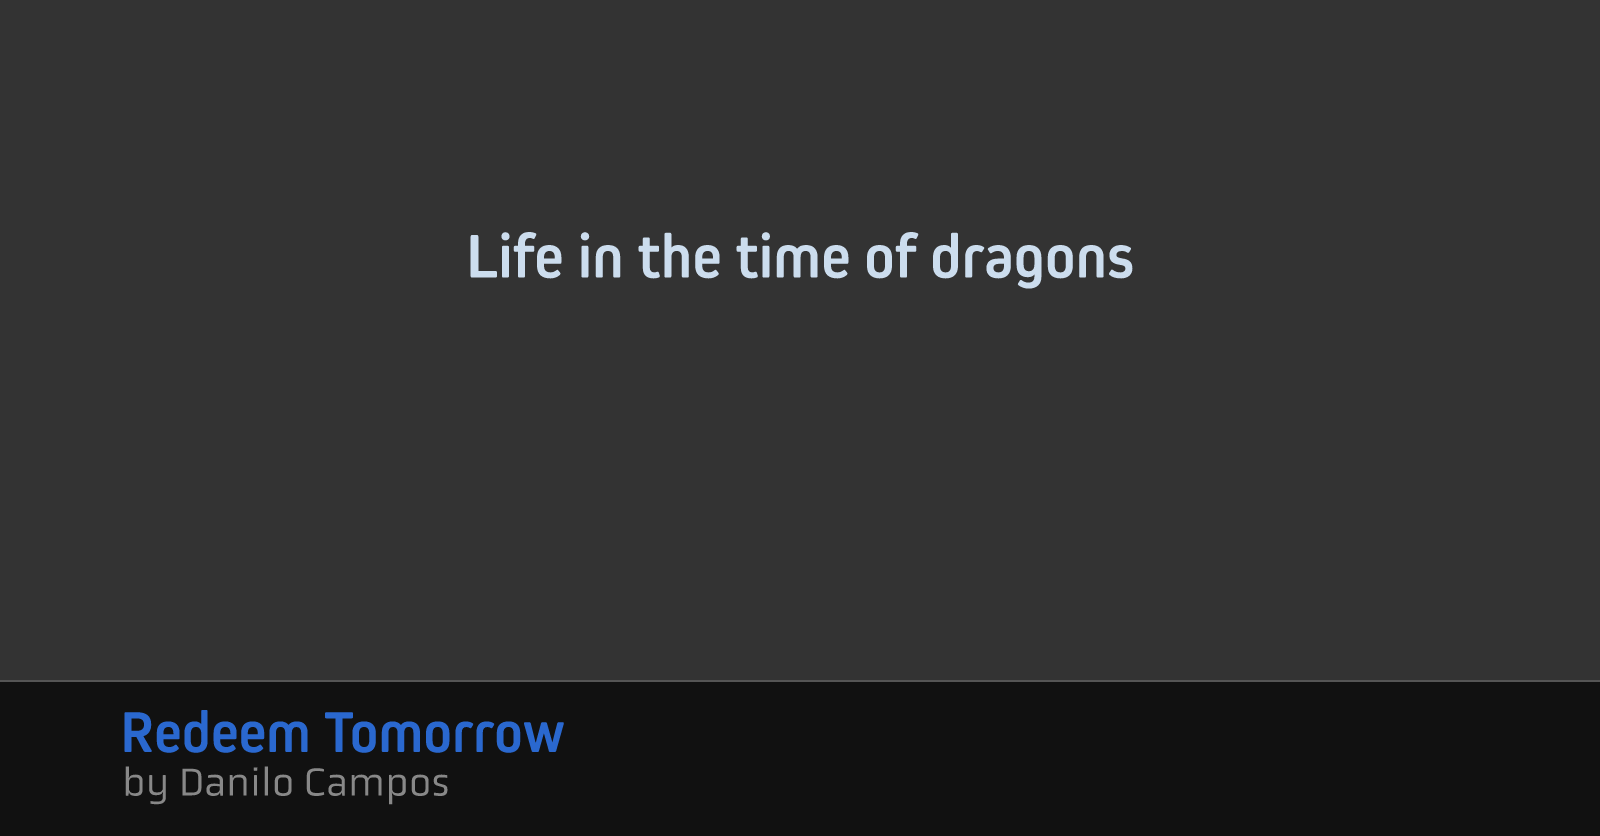 Life in the time of dragons